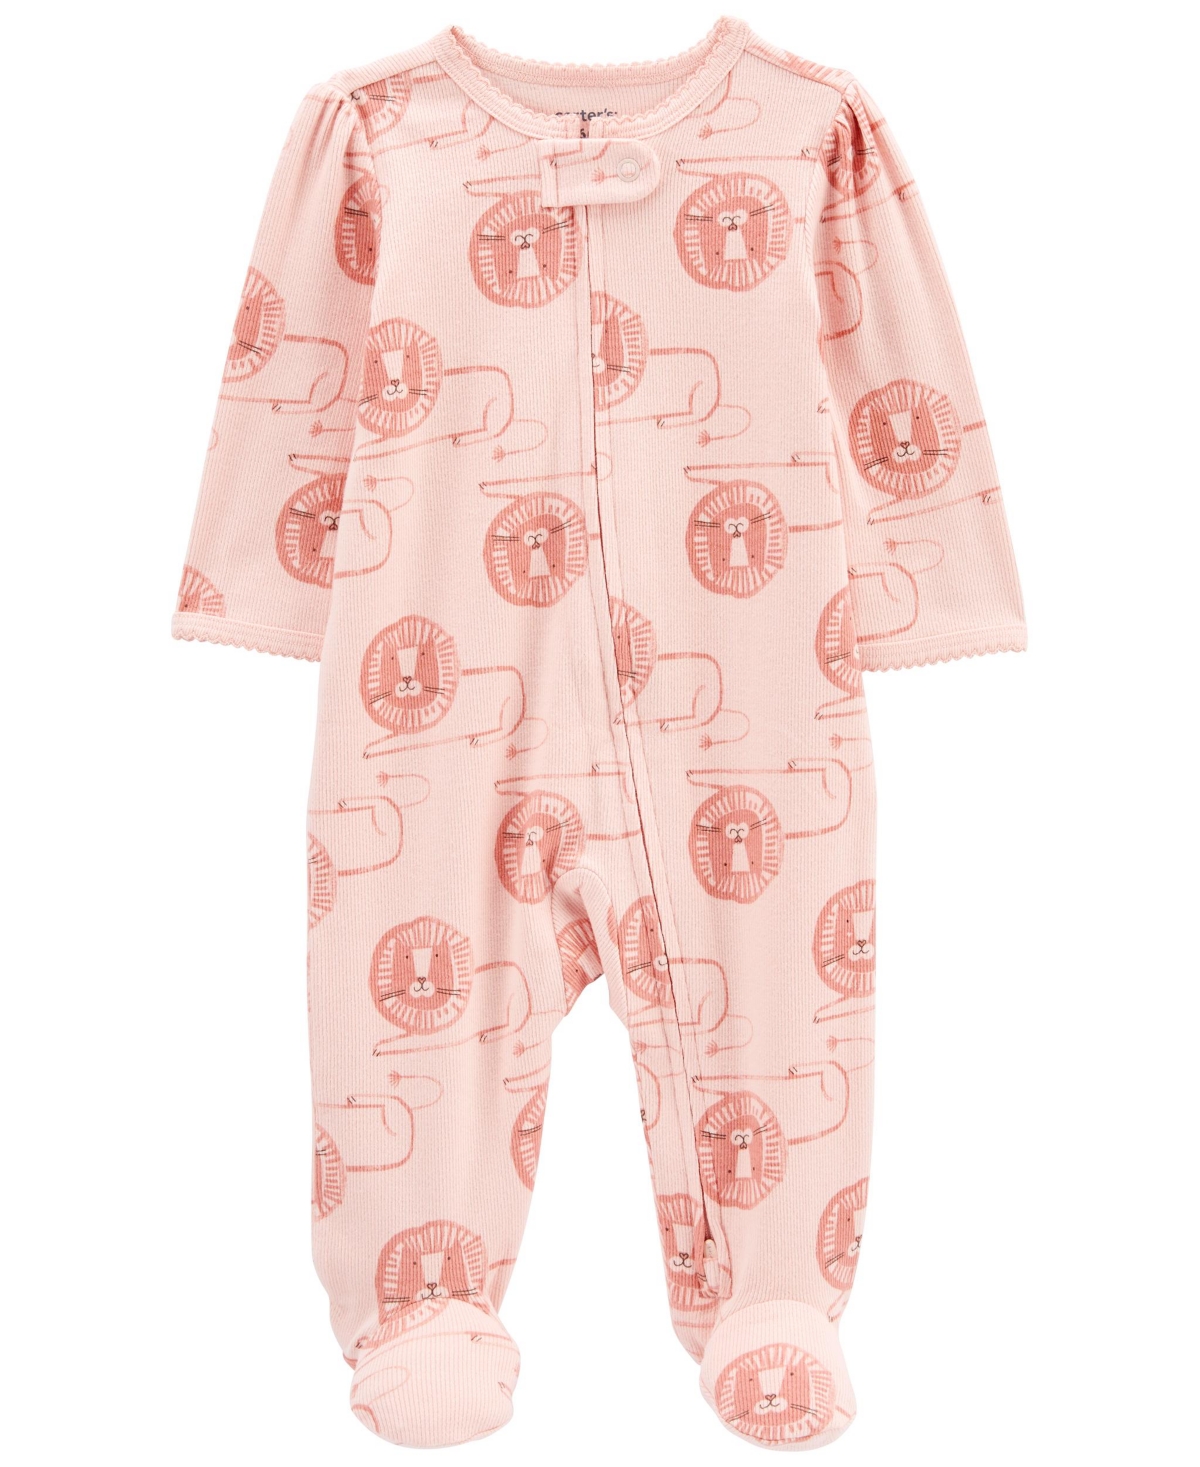 CARTER'S BABY GIRLS LION ZIP UP COTTON BLEND SLEEP AND PLAY